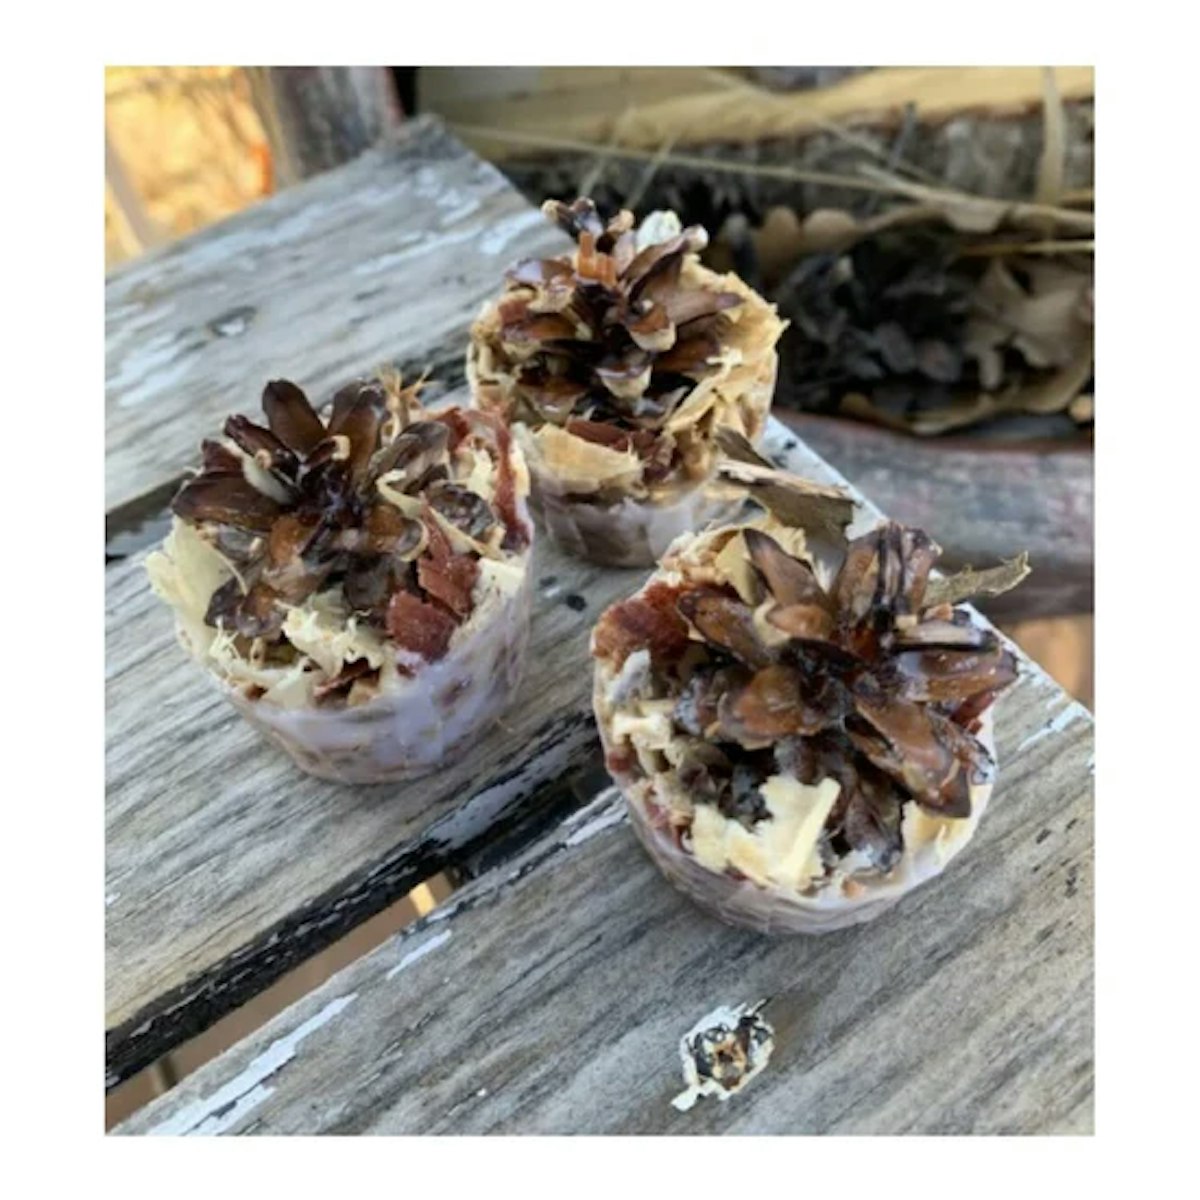 Three pine cones on top of a wooden table.